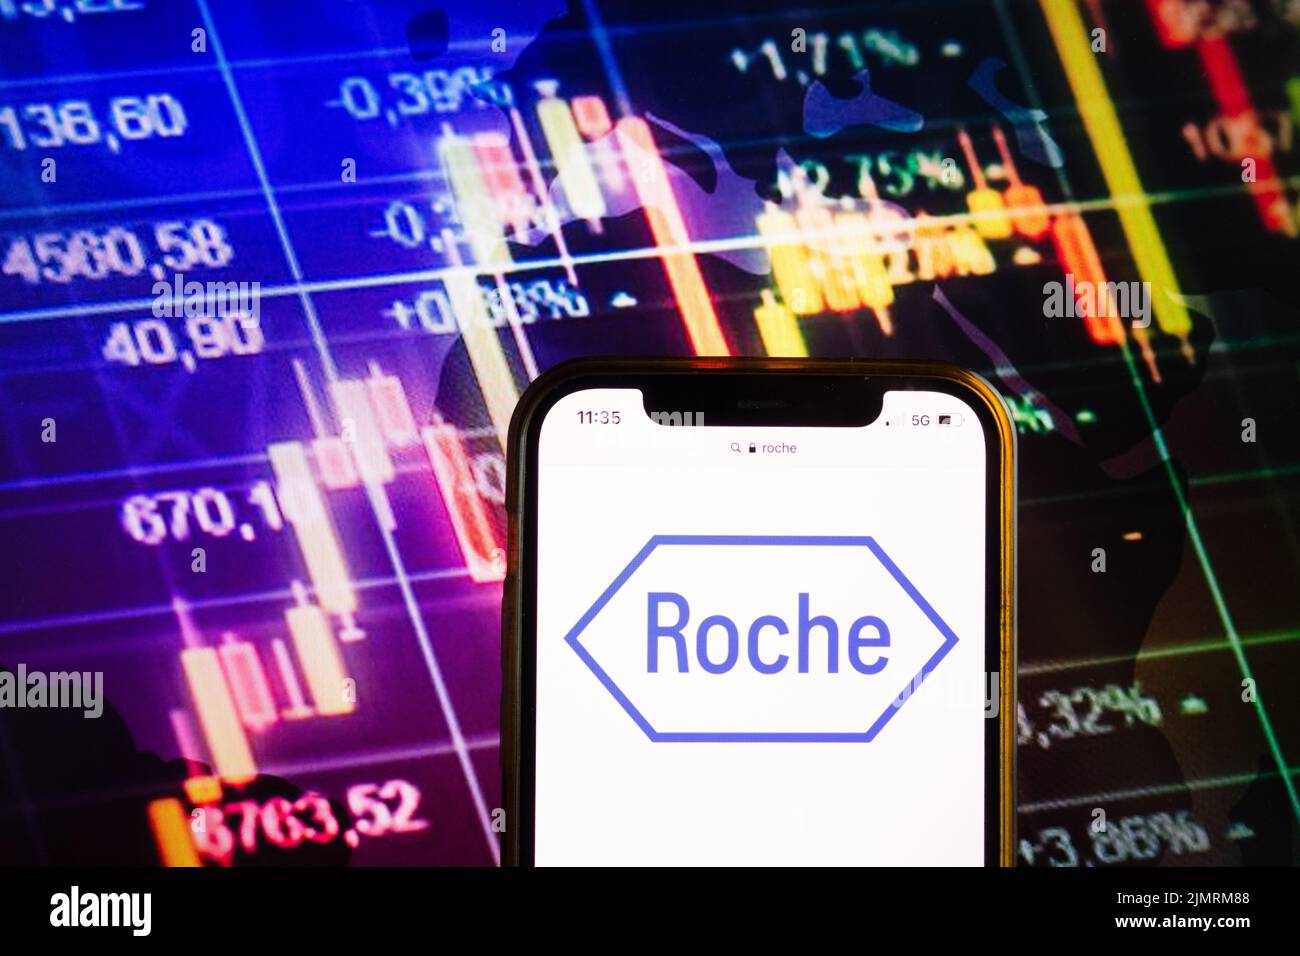 KONSKIE, POLAND - August 07, 2022: Smartphone displaying logo of F. Hoffmann-La Roche AG on stock exchange diagram background Stock Photo